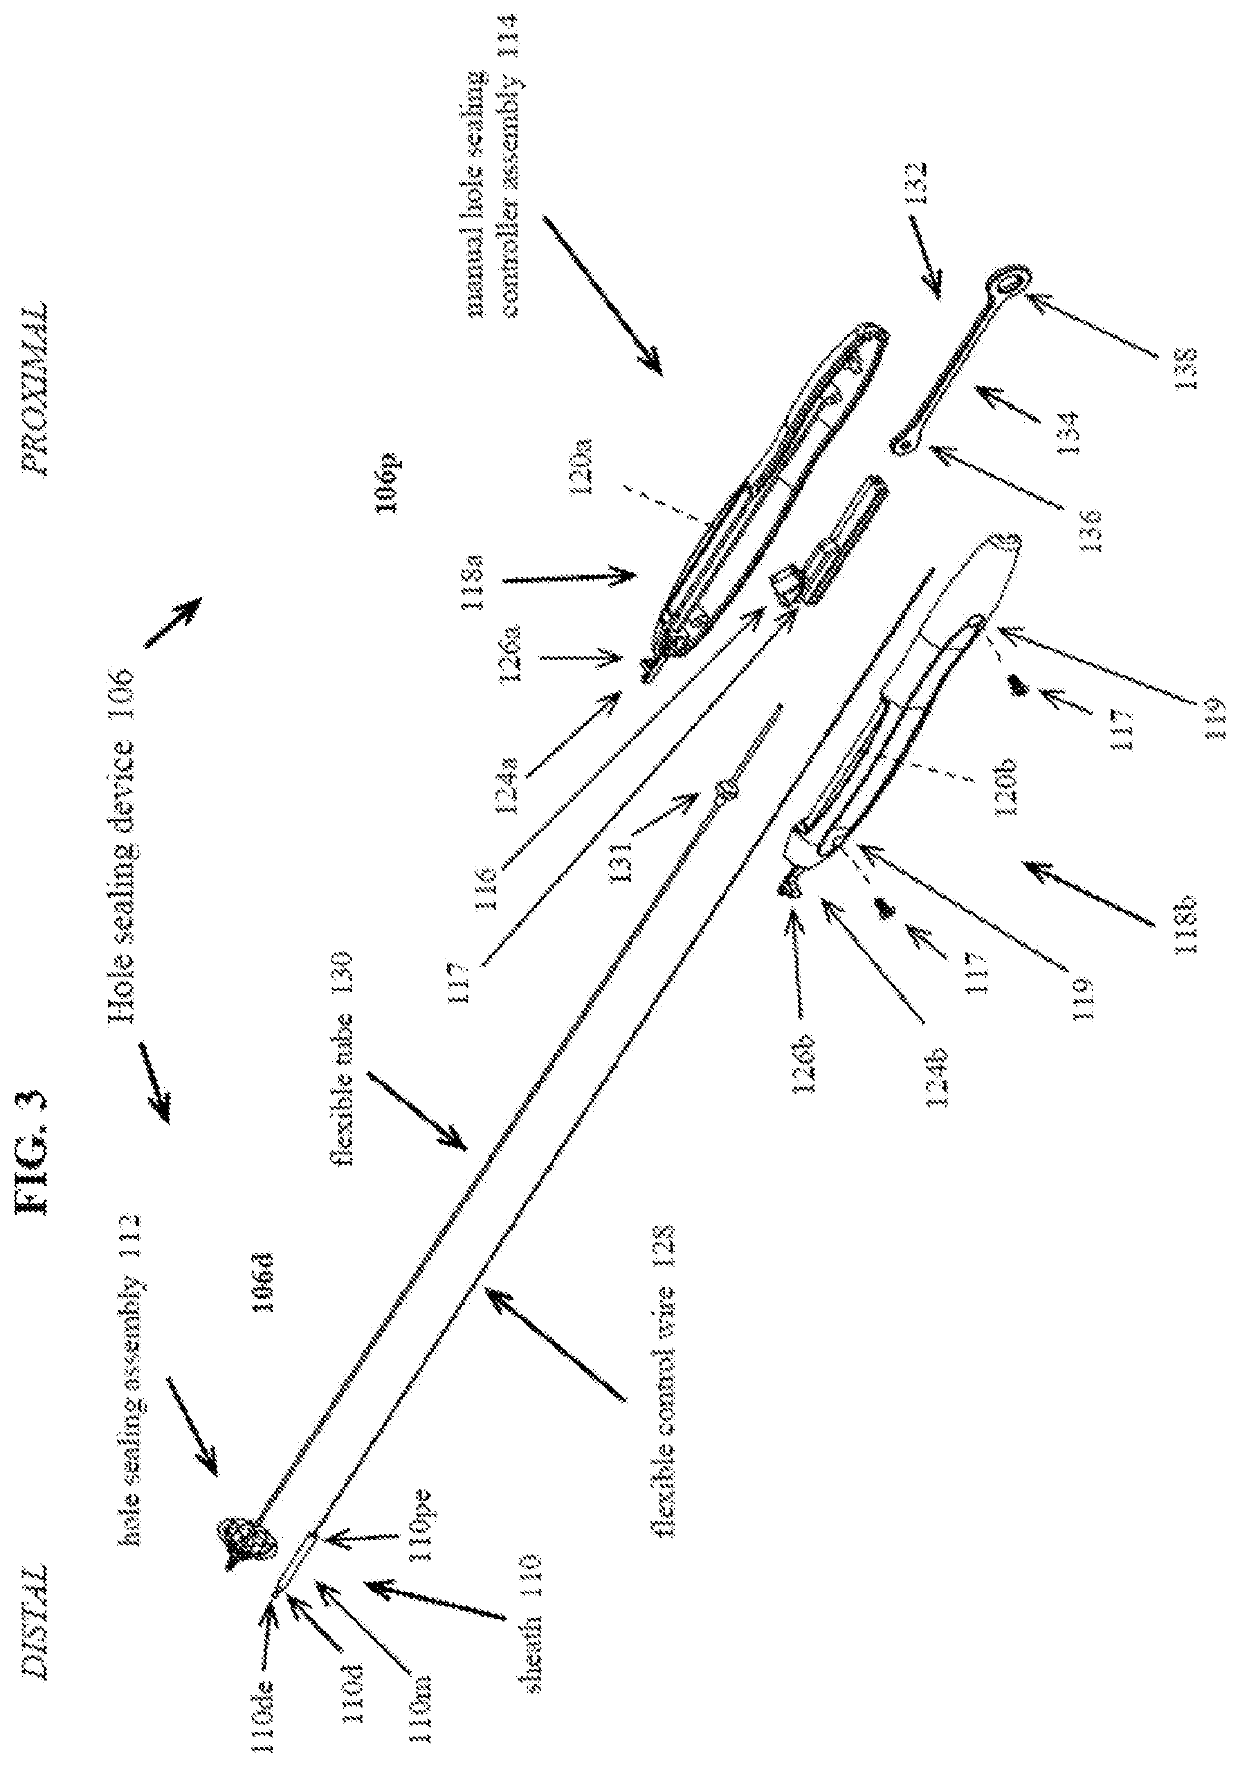 Apparatuses and methods for use in surgical vascular anastomotic procedures